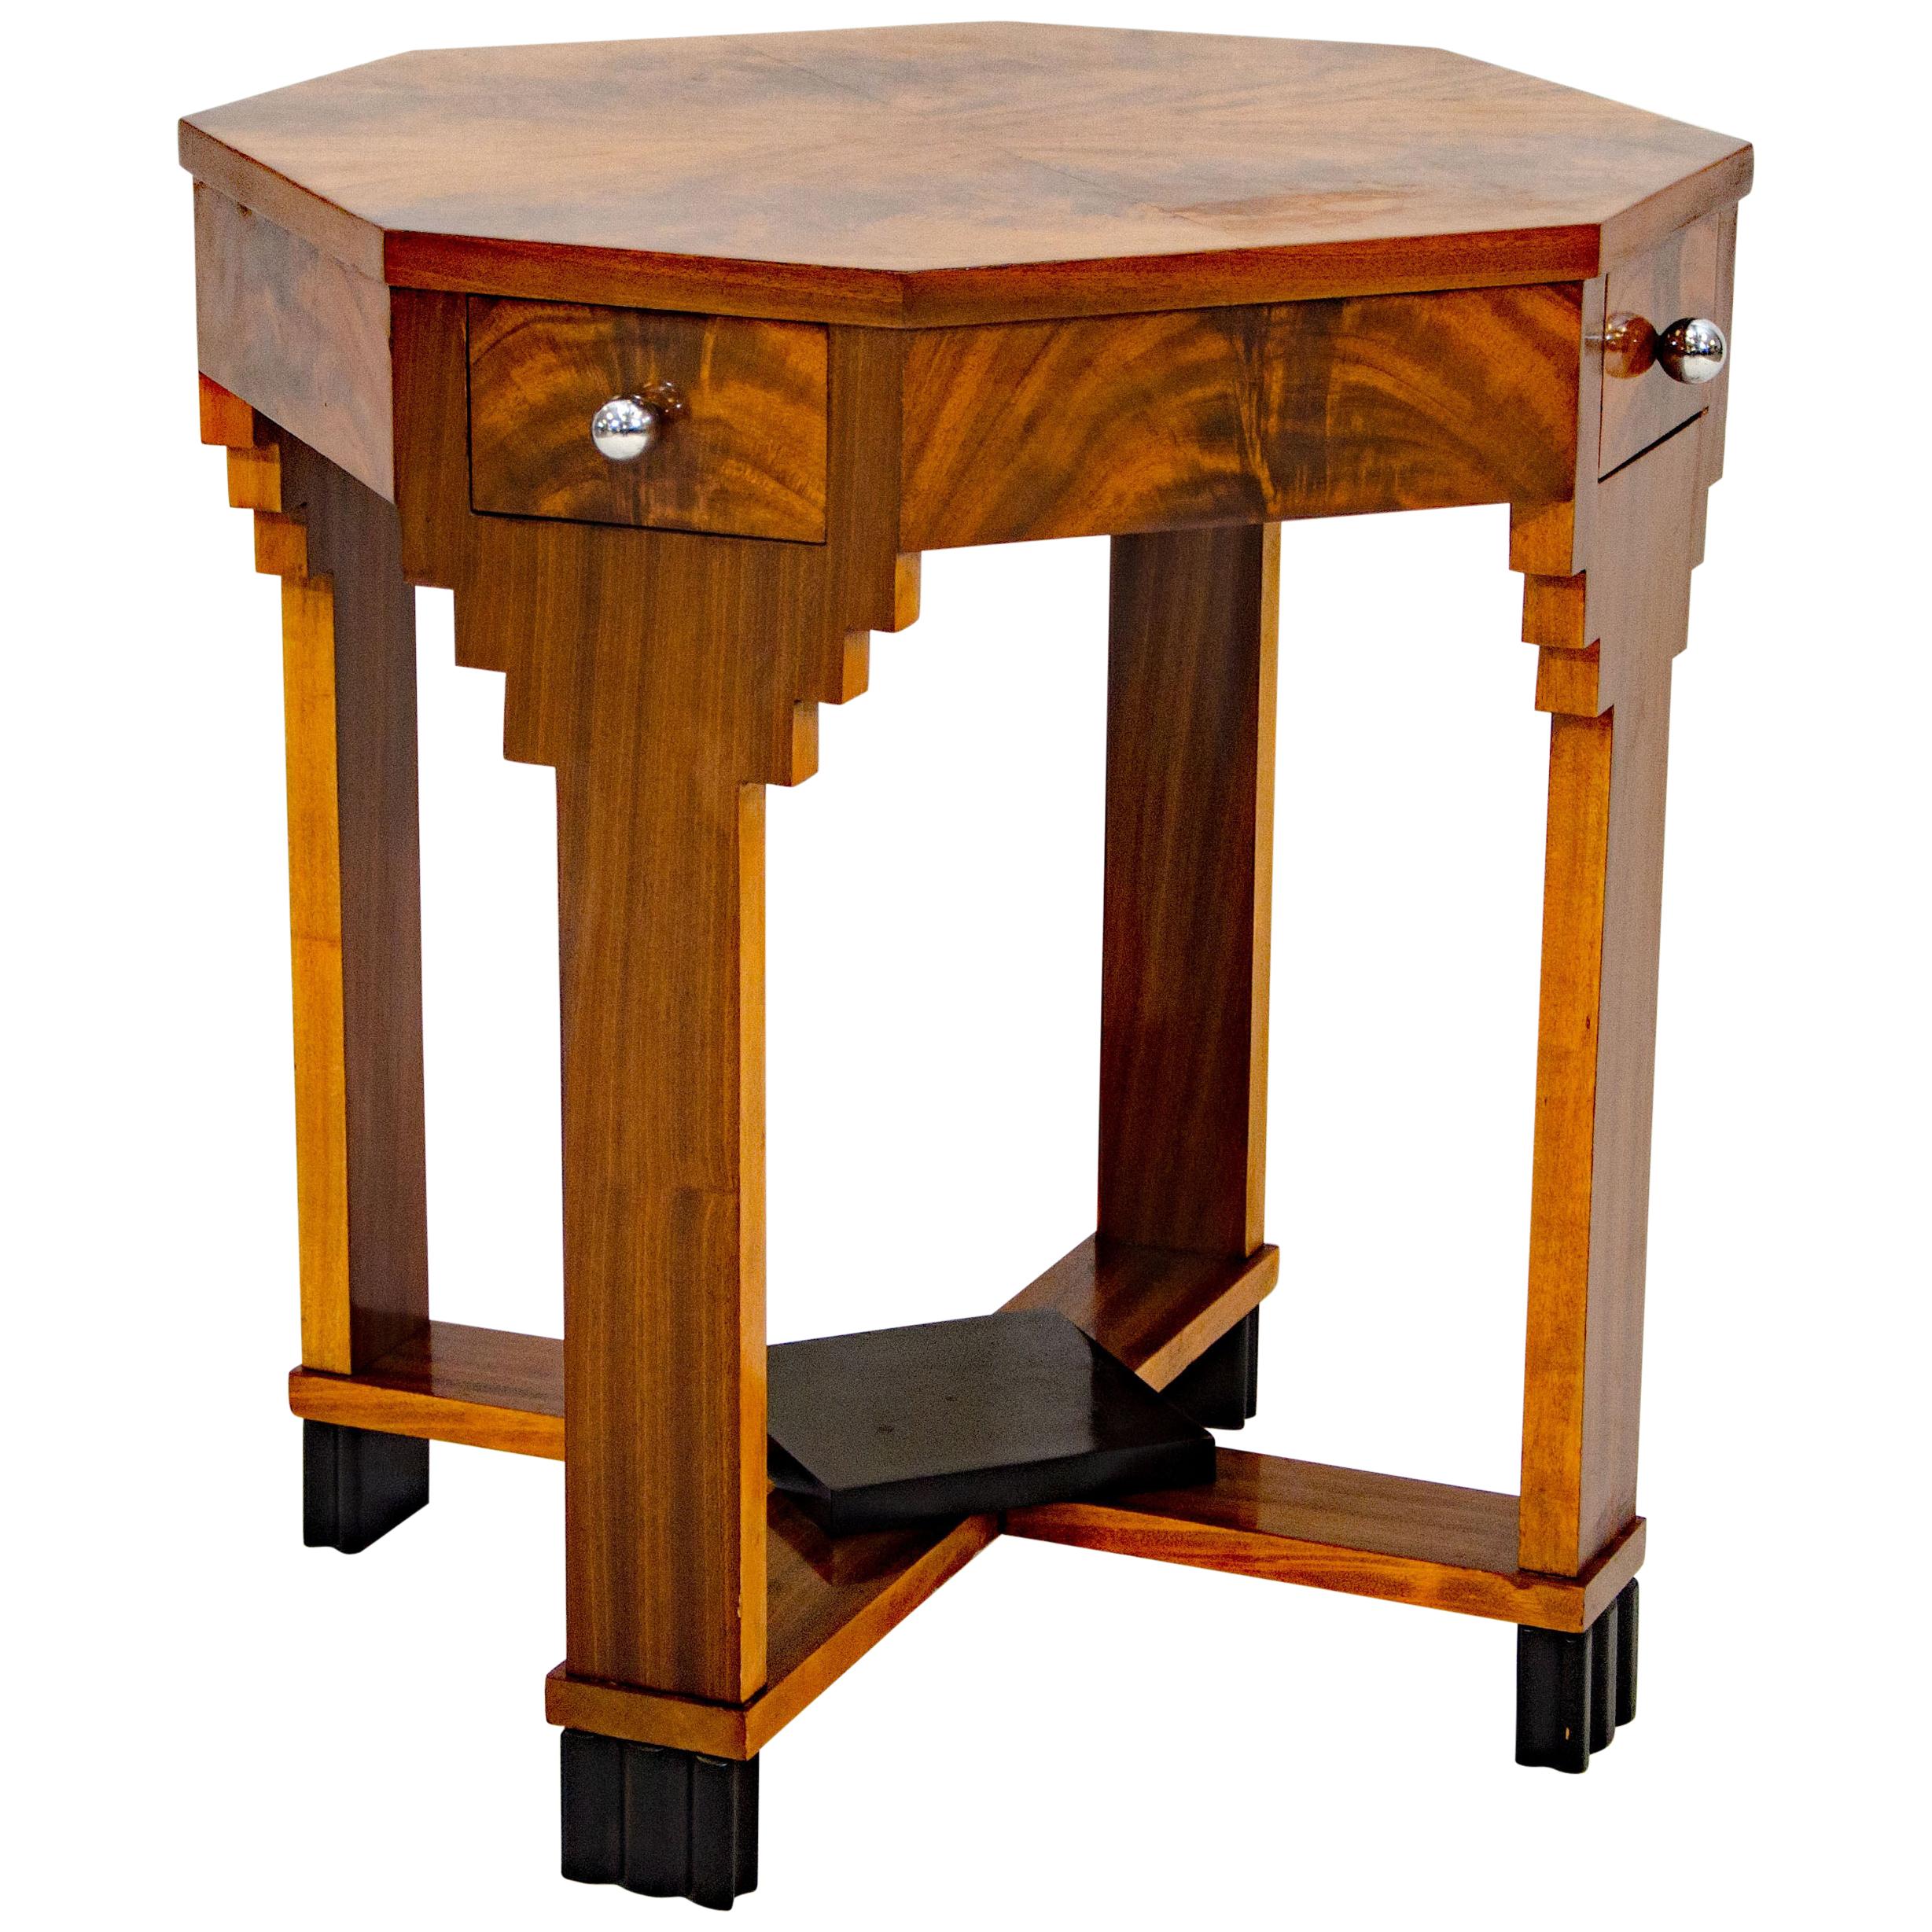 French Art Deco Octagonal Occasional or Accent Table